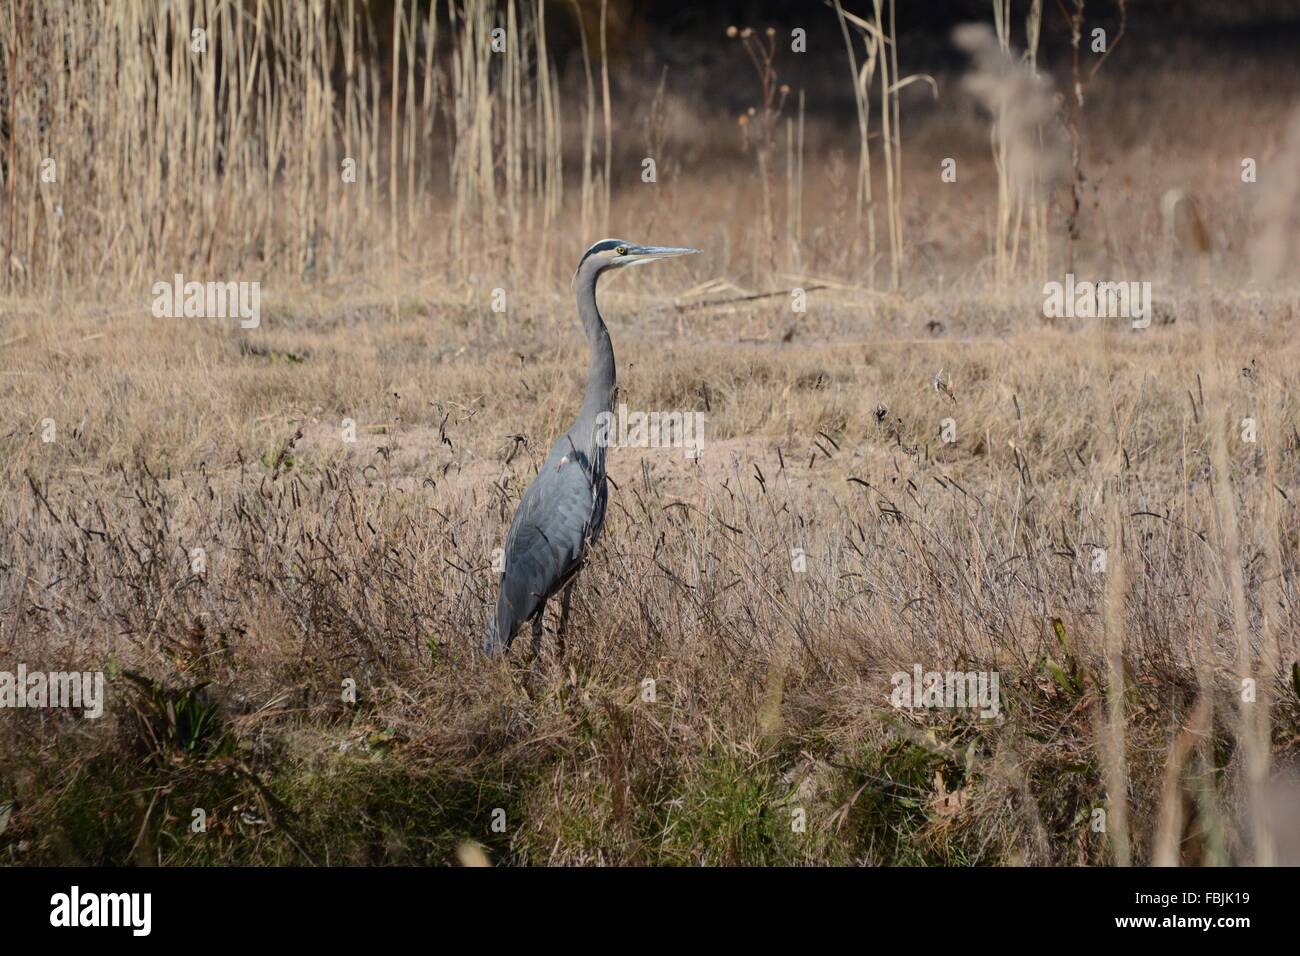 Great Blue Heron standing in tall grasses Stock Photo